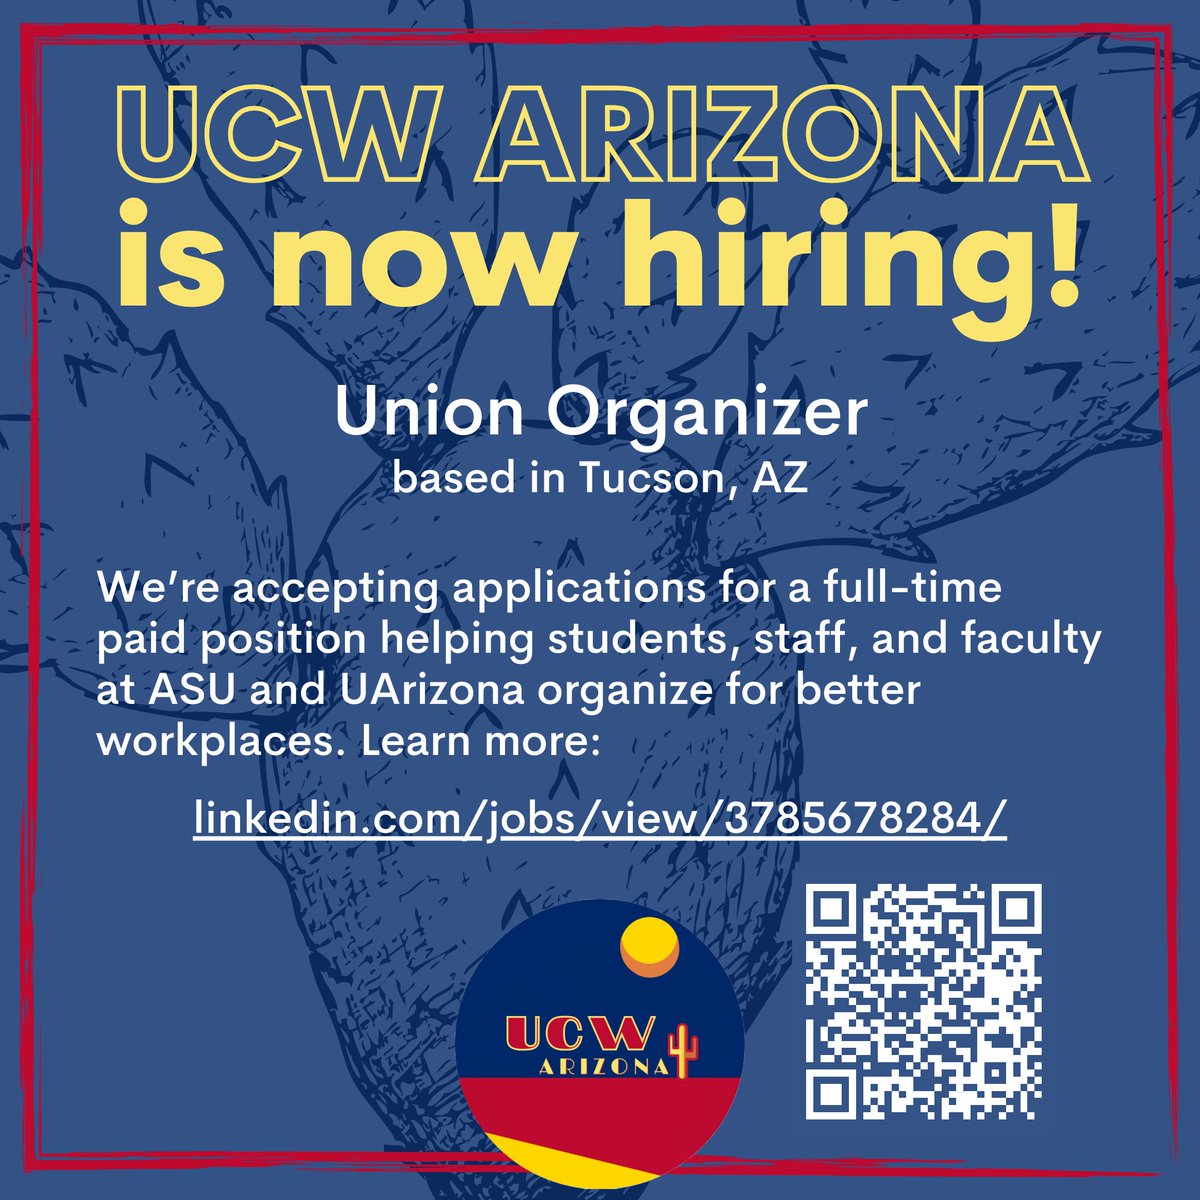 UCW Arizona is seeking a full-time Union Organizer. The position is based in Tucson, Arizona, and compensation is $60K per year. Learn more: linkedin.com/jobs/view/3785…